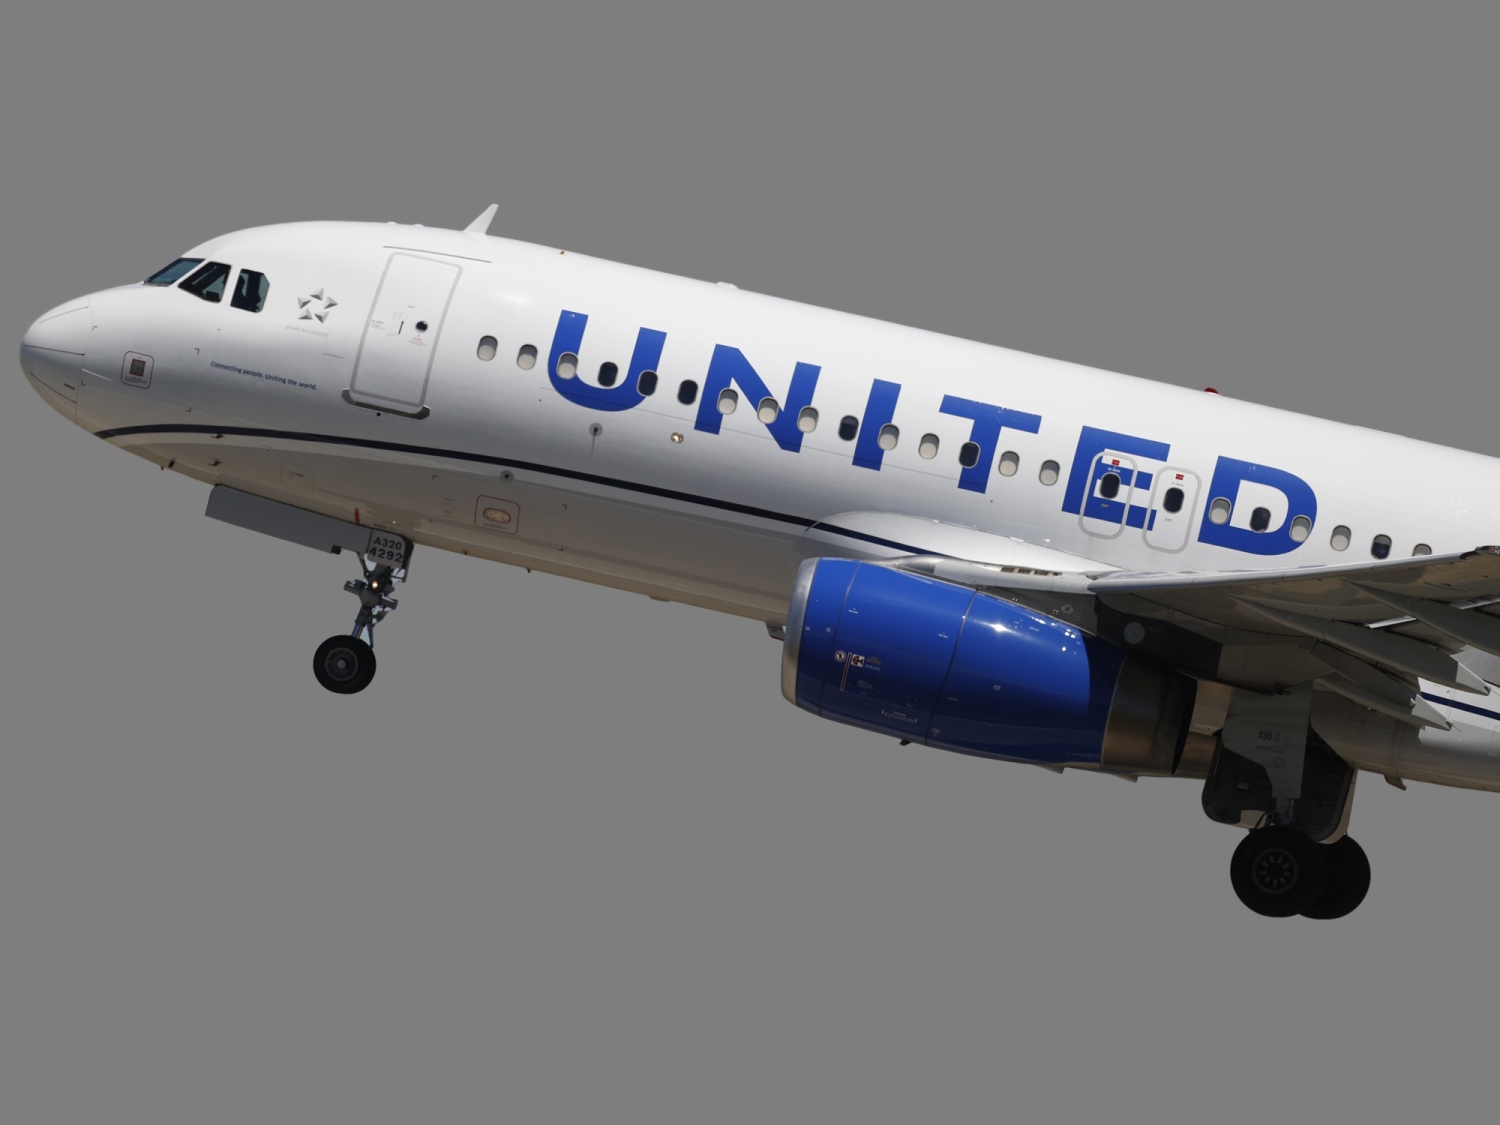 United CFO says Covid’s financial impact was worse than the worst case scenario: ‘We weren’t even close’